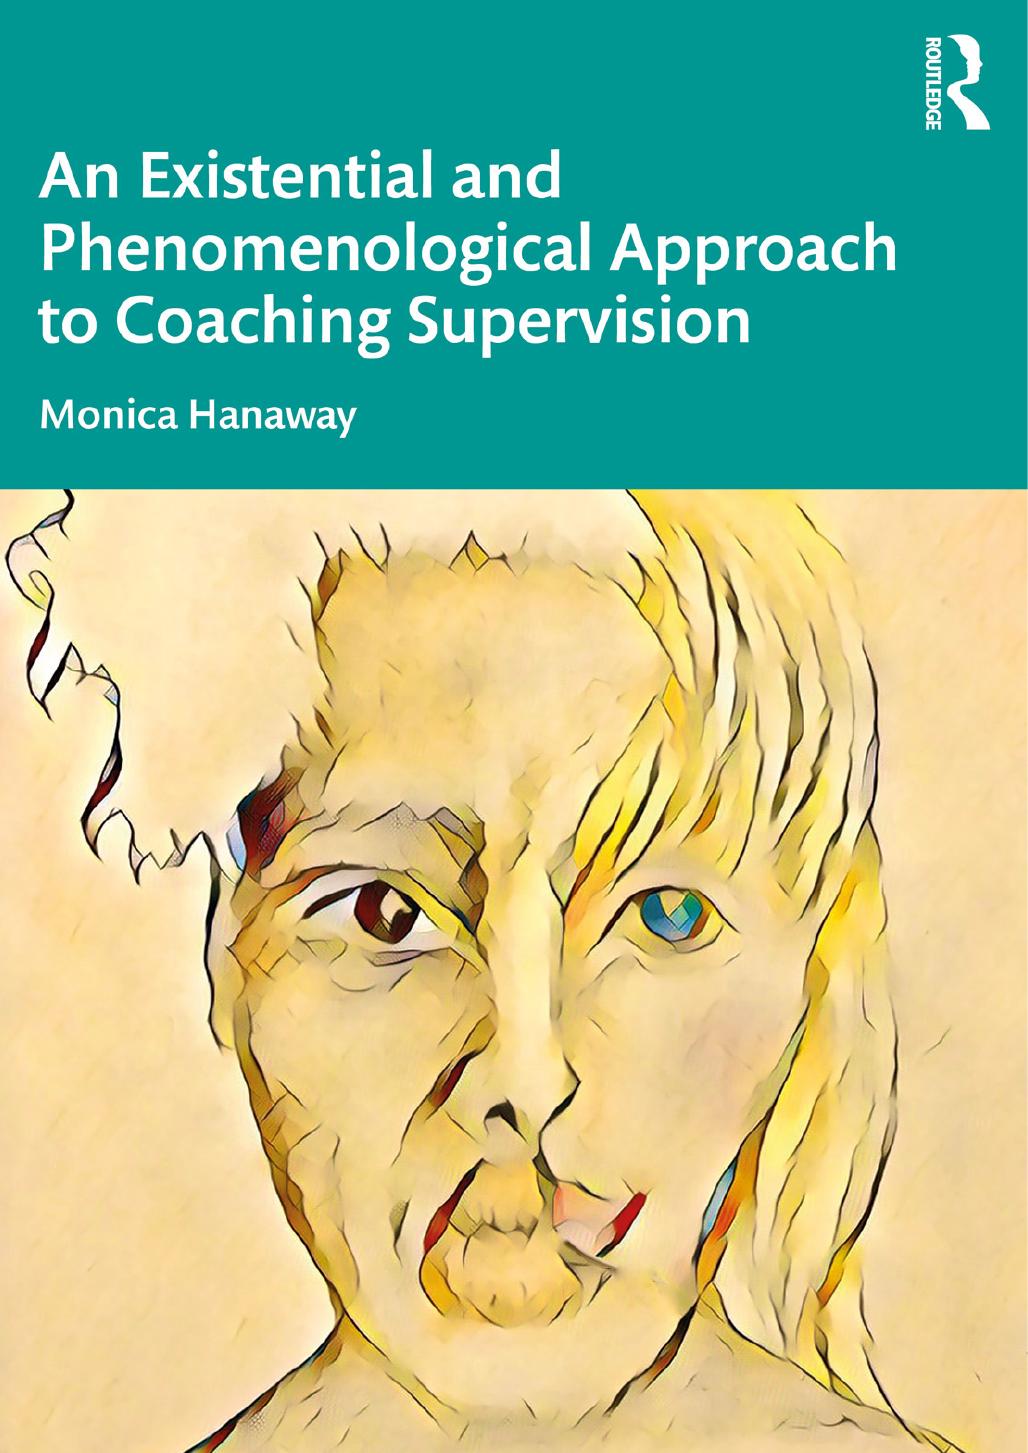 An existential and phenomenological approach to coaching supervision